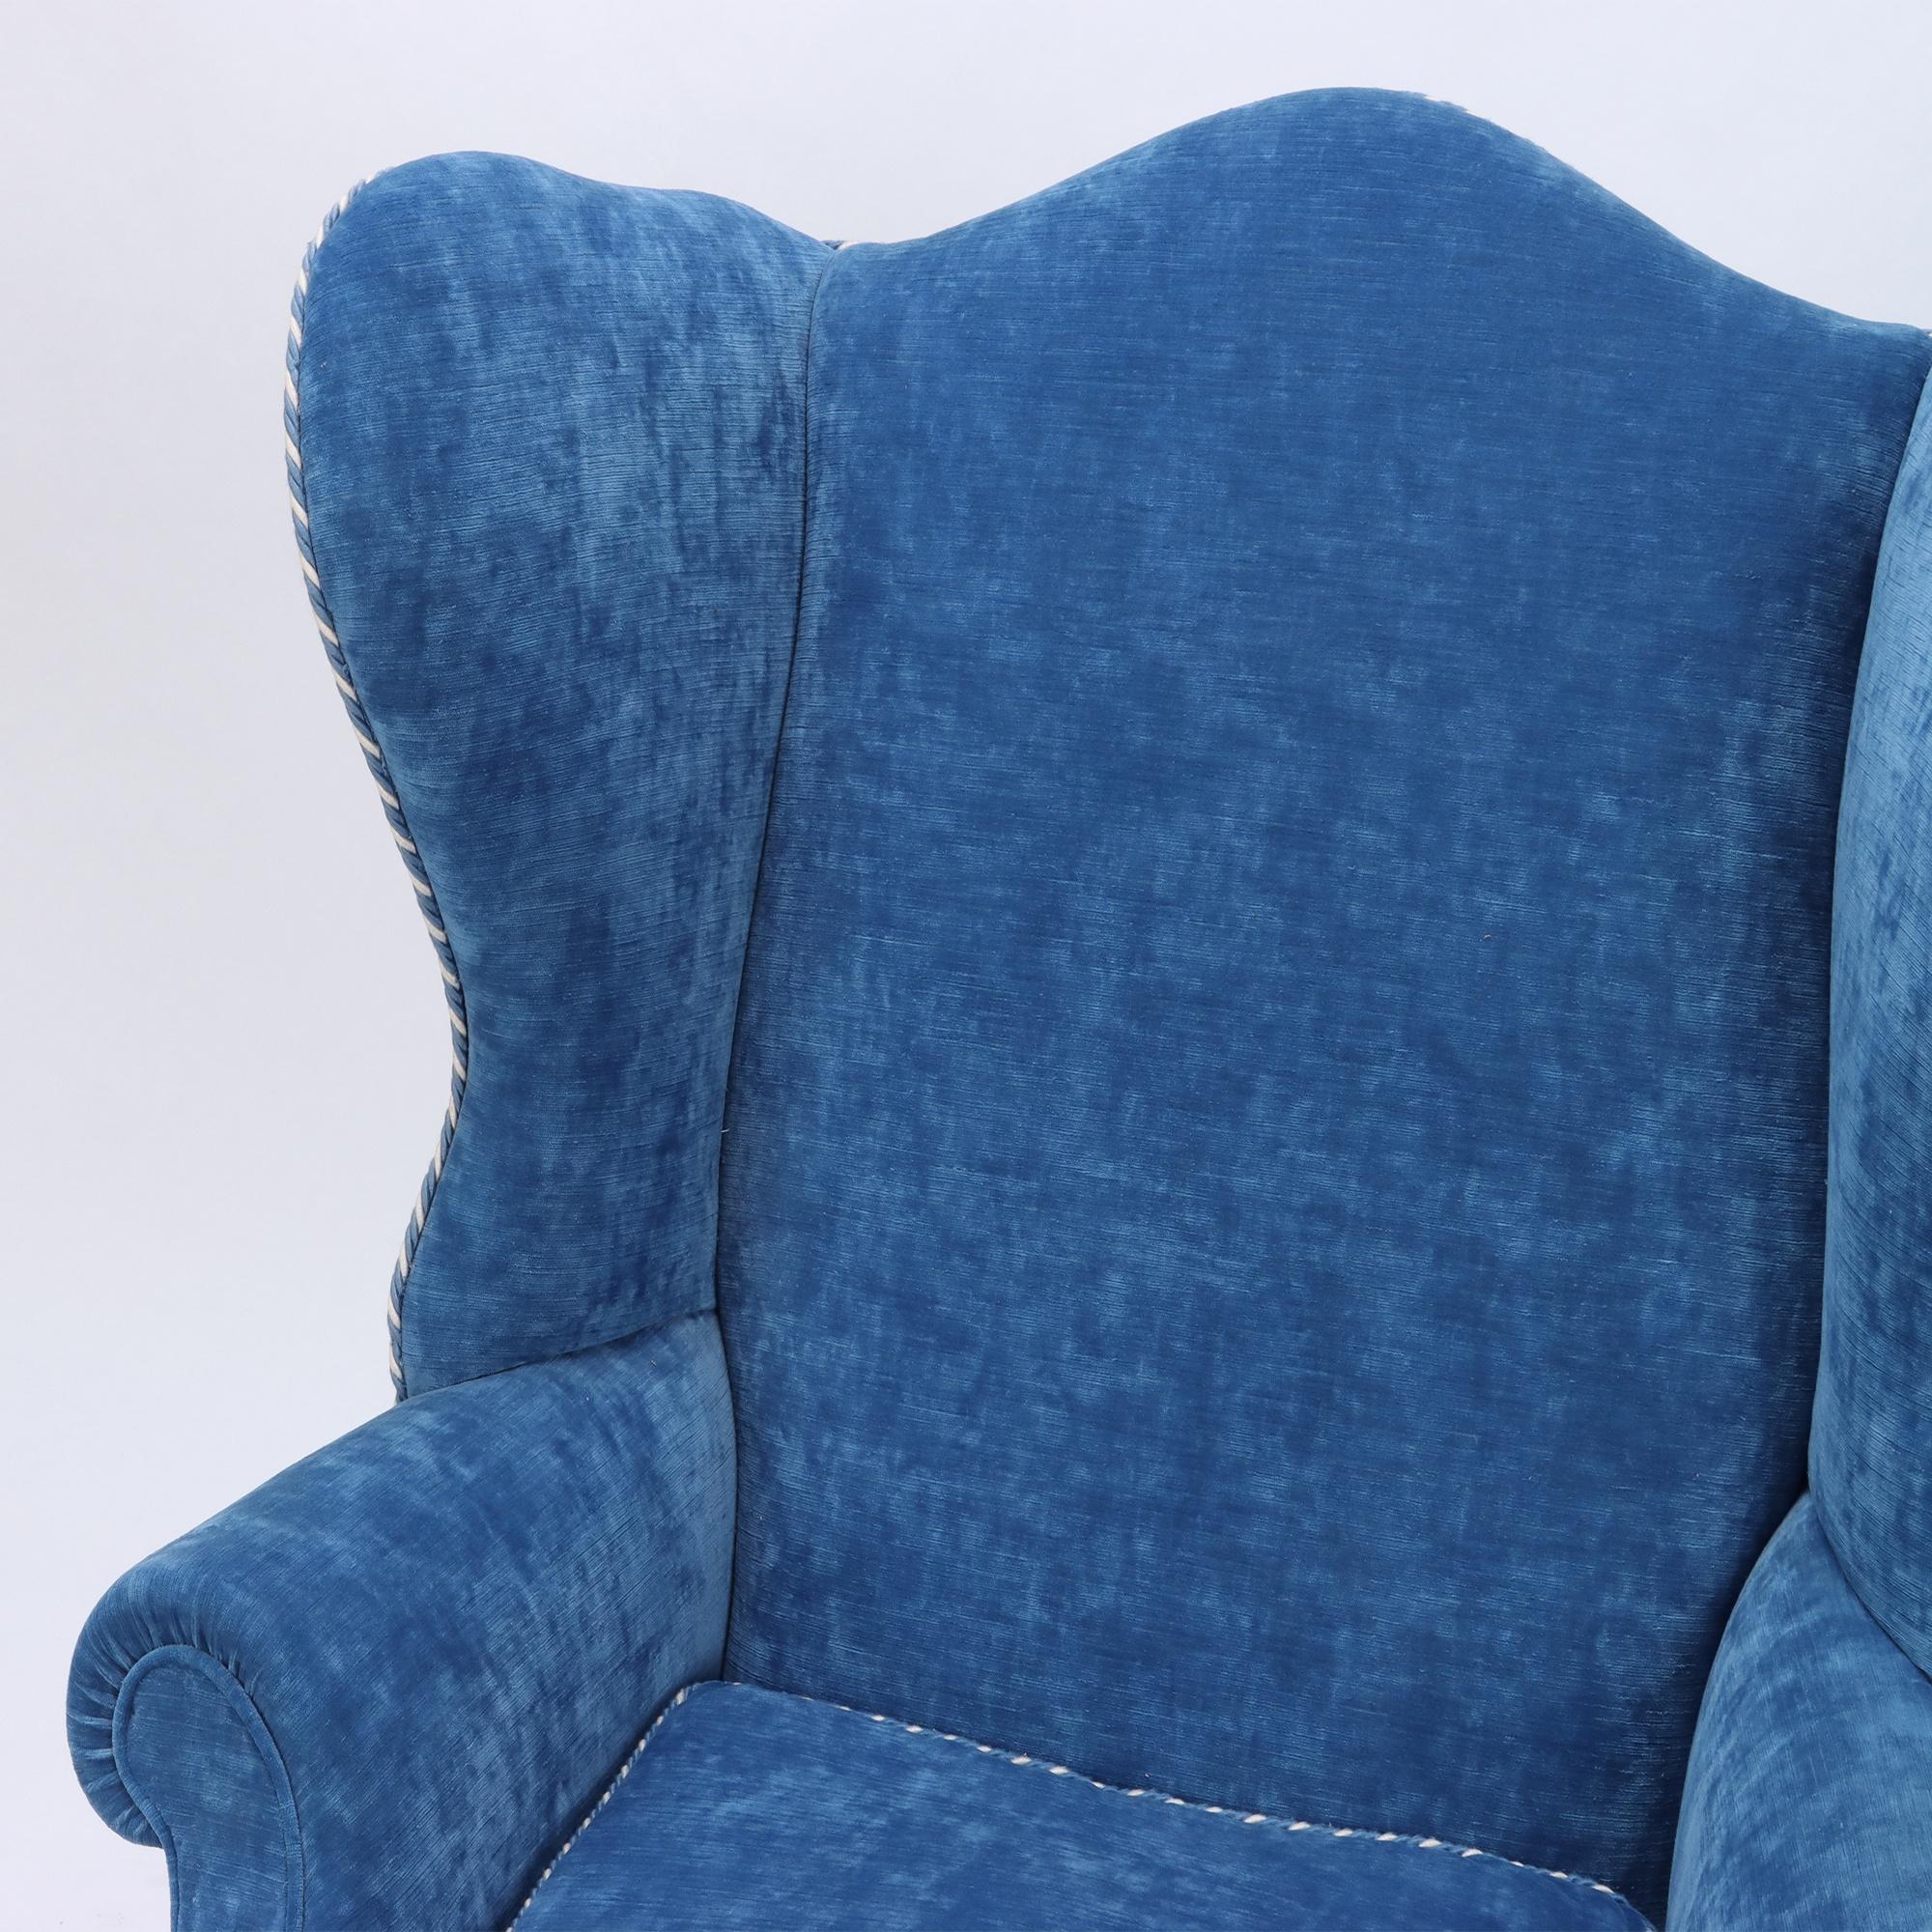 blue oversized chair with ottoman